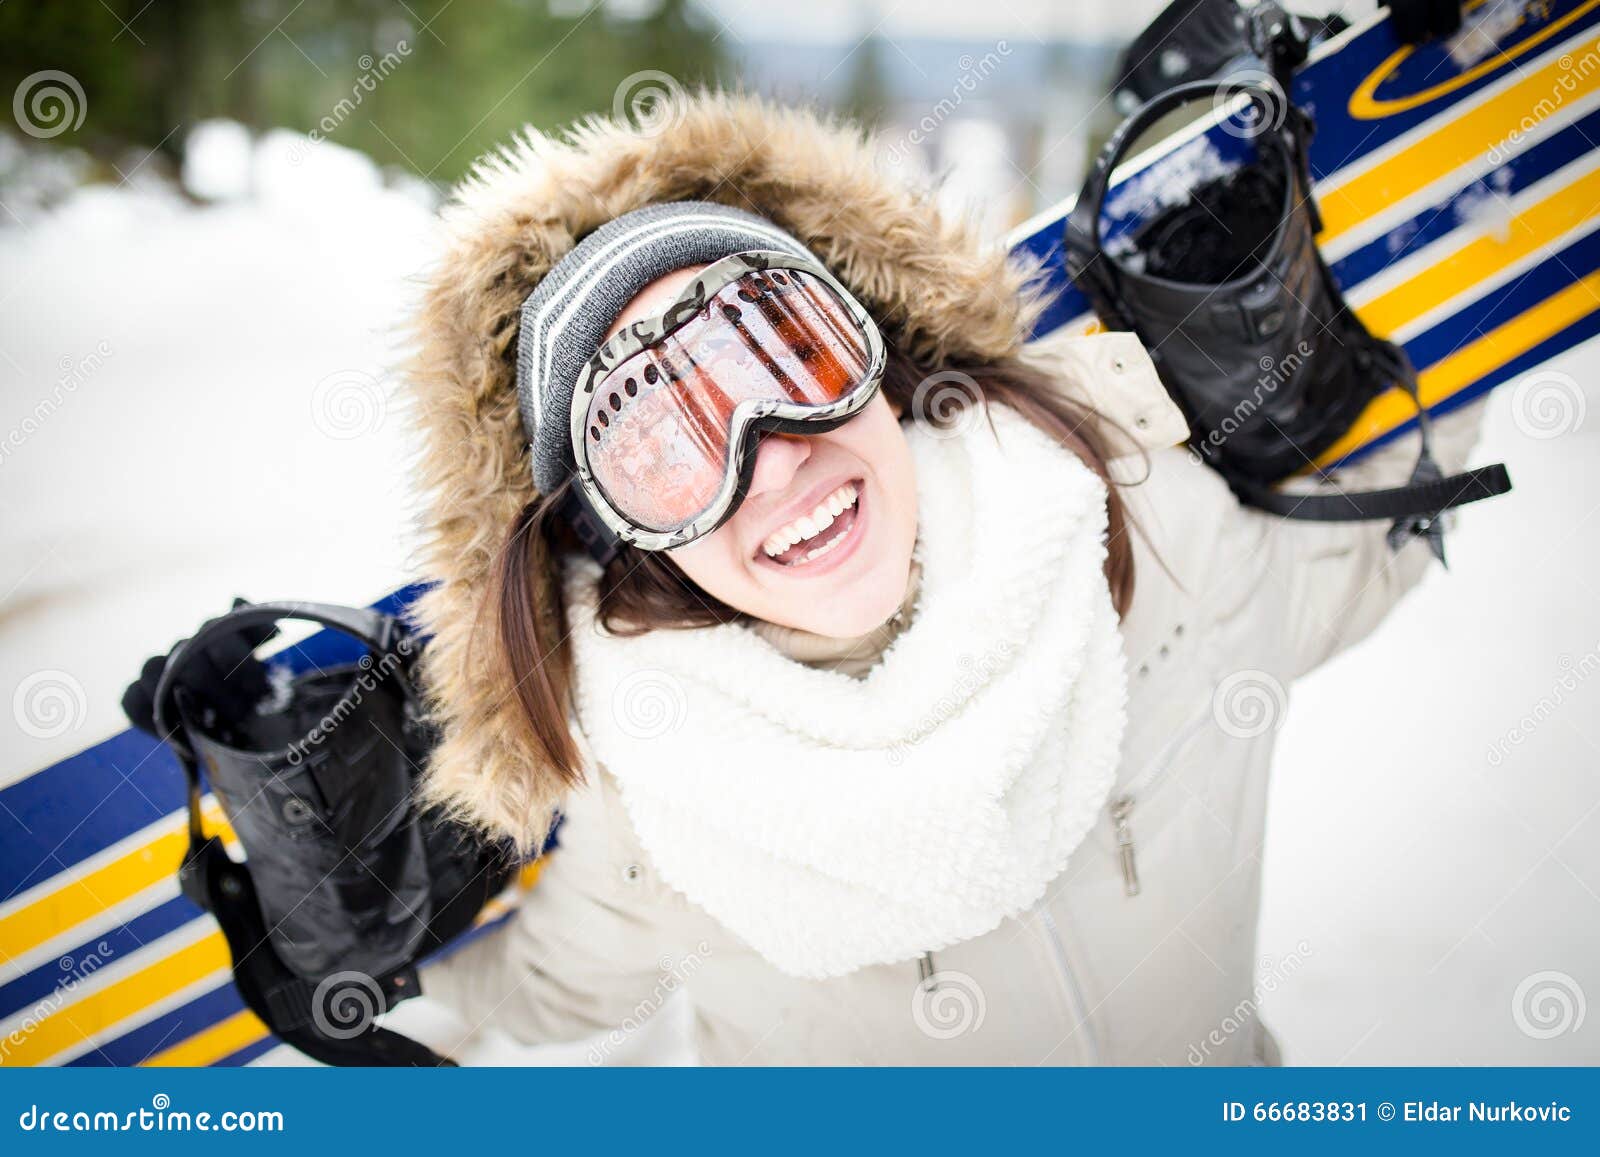 Snowboarding.Young Beautiful Woman with Ski Mask Holding Her 